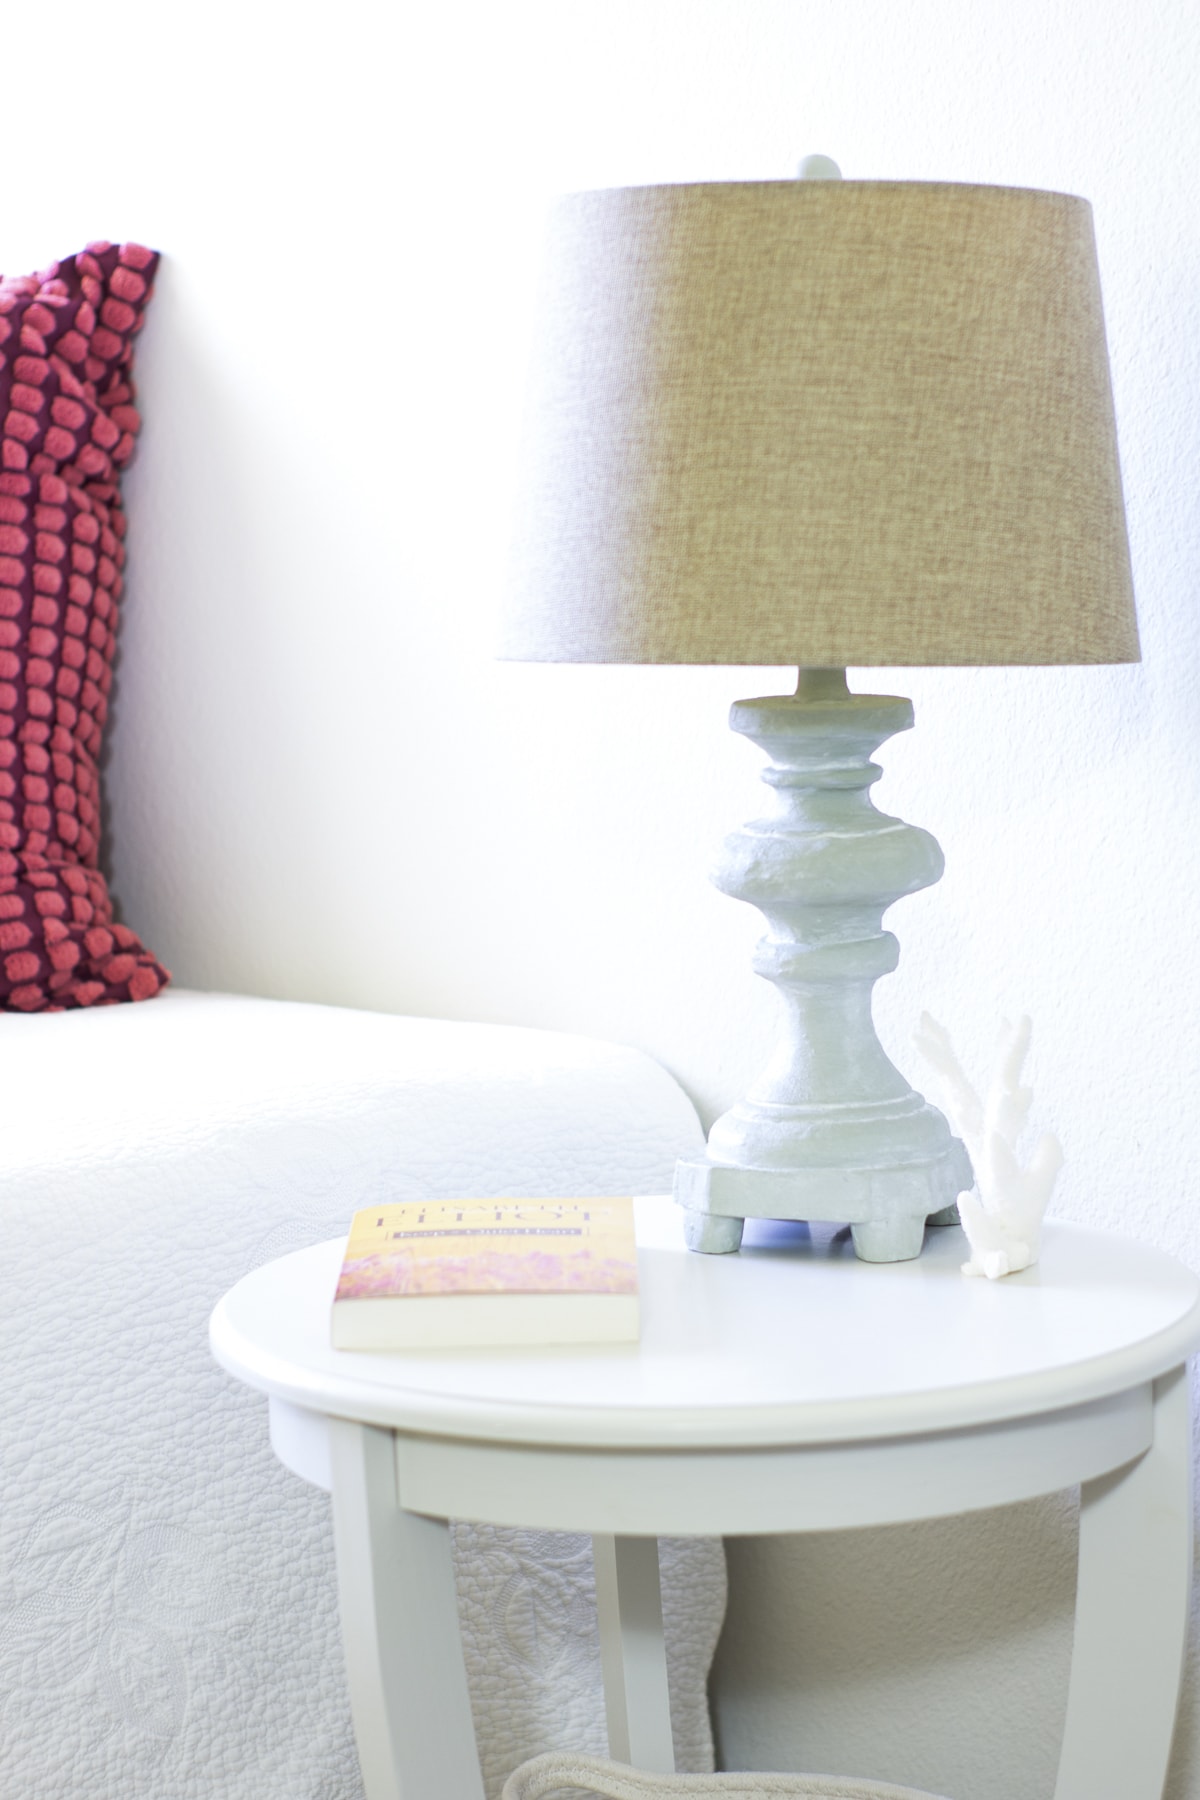 lamp on nightstand with bed and pink pillows to the left